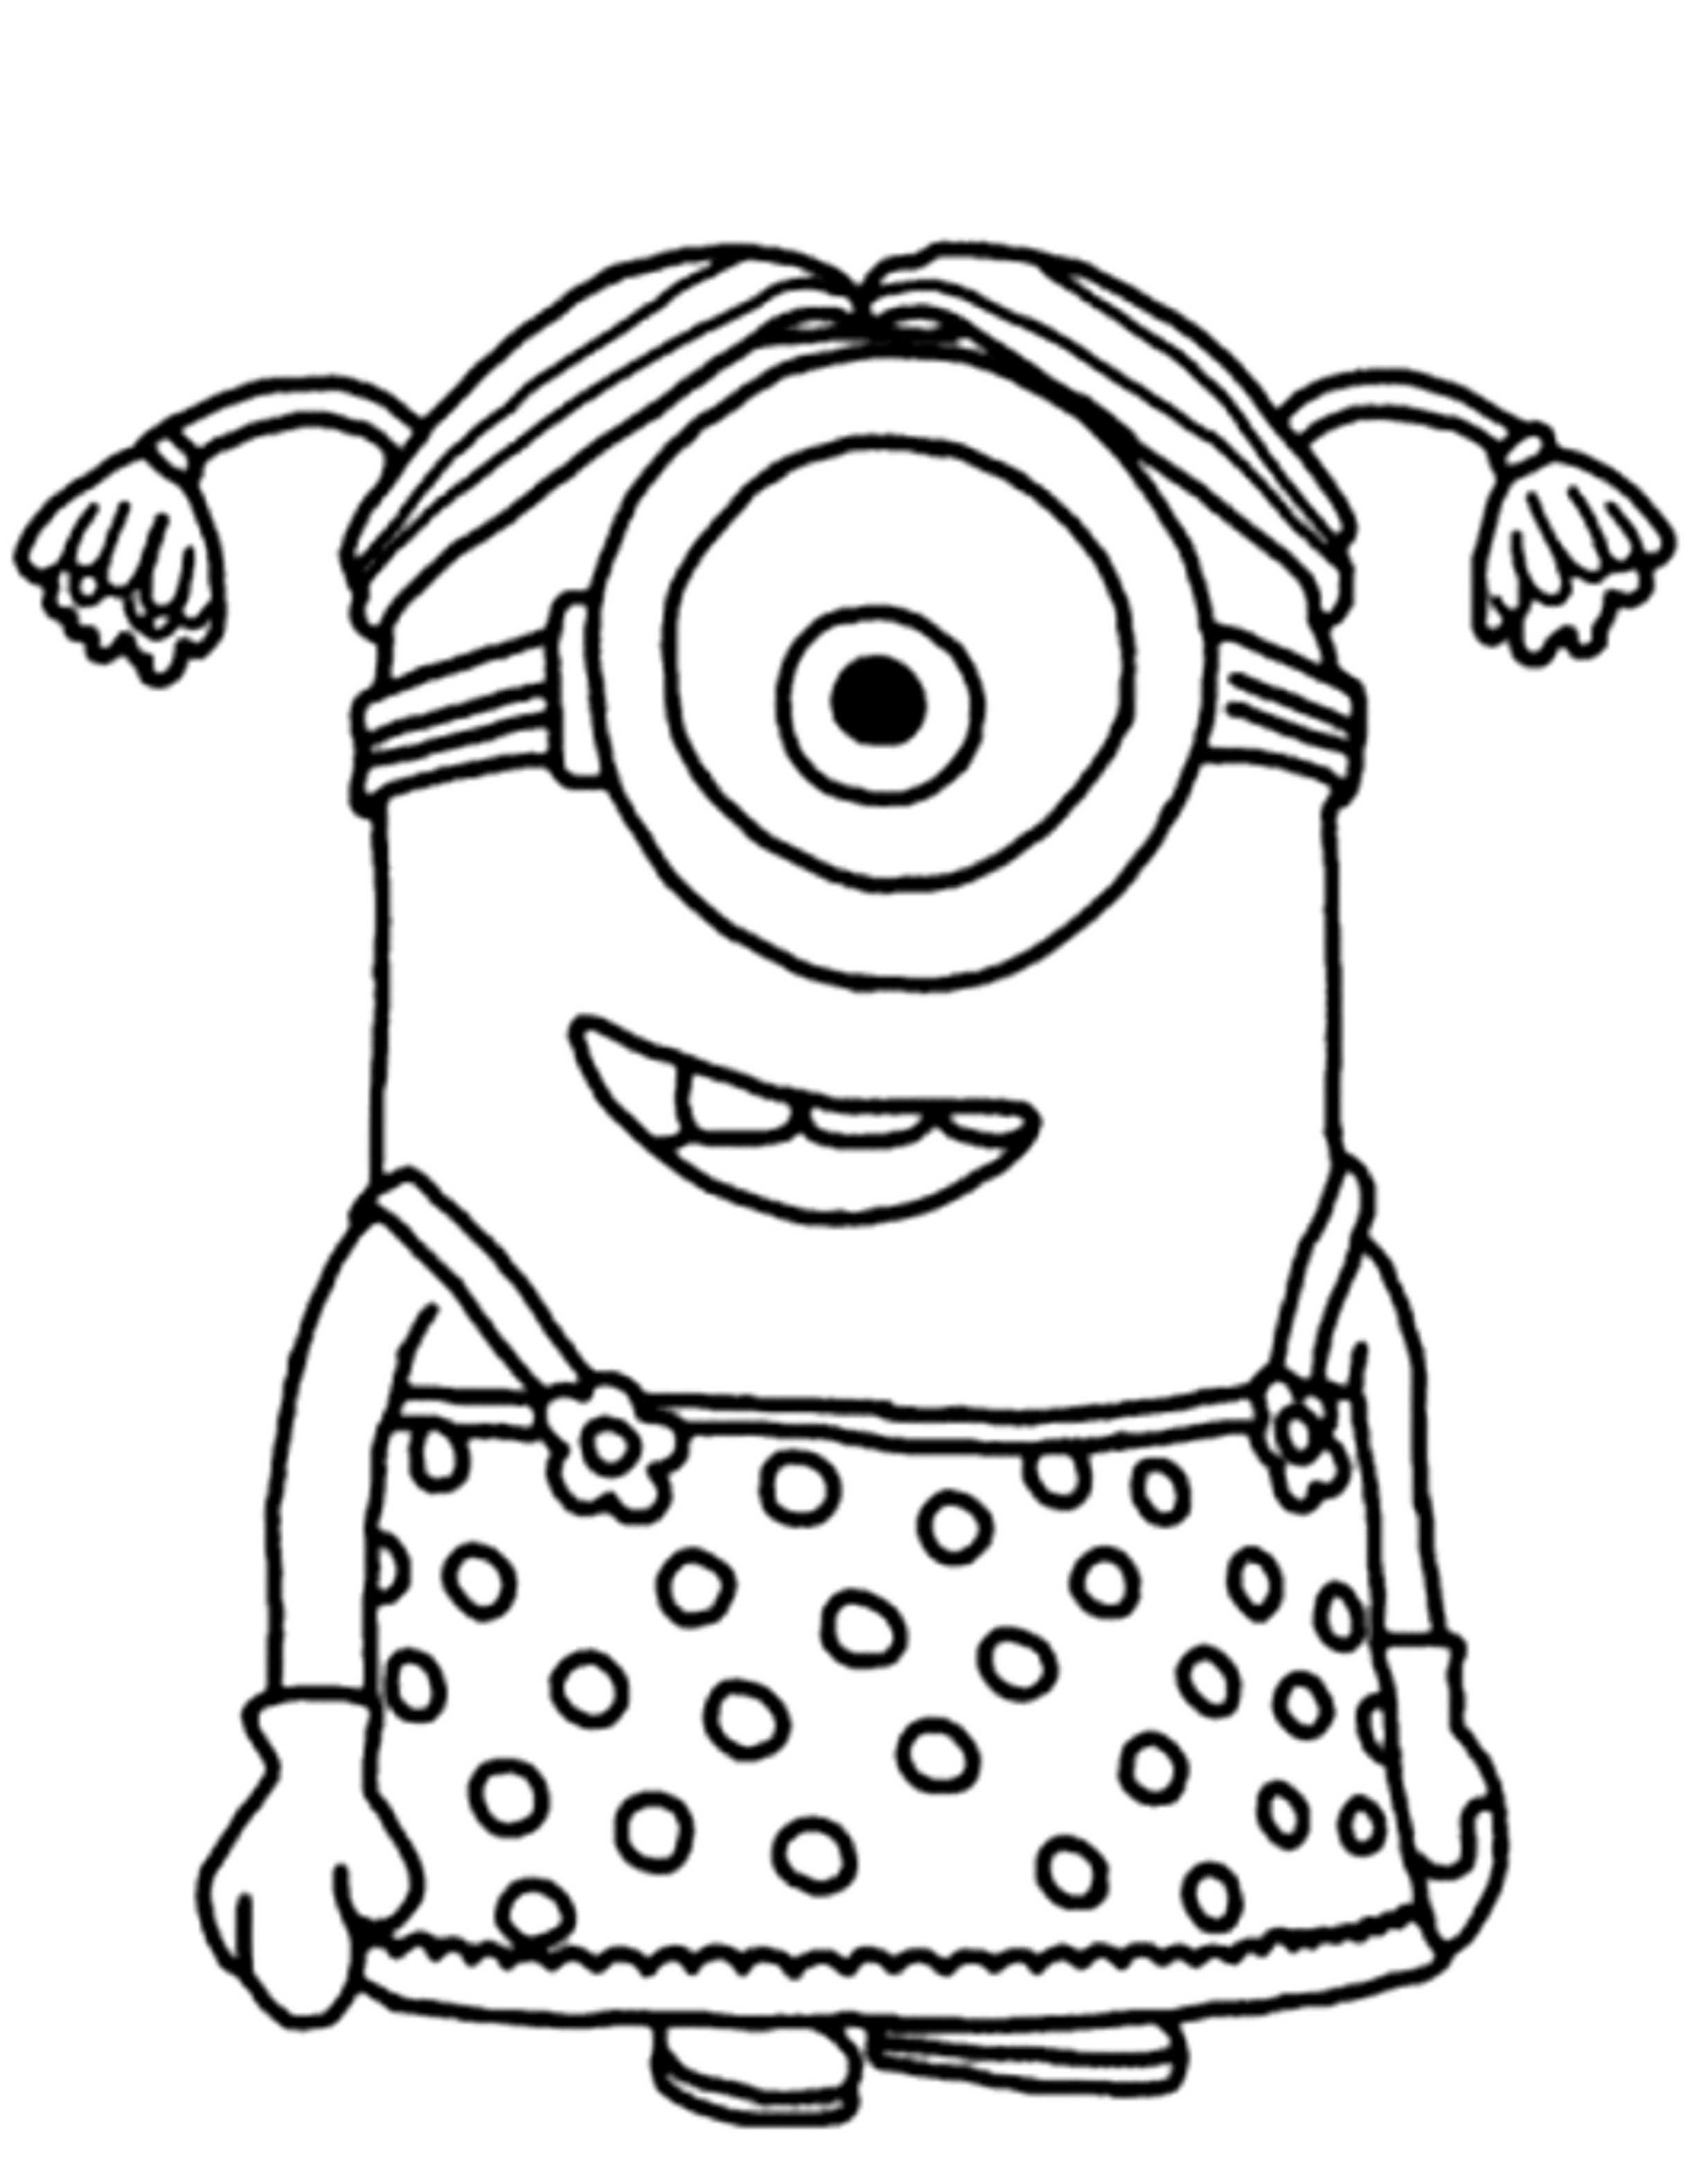 Minions Coloring Pages Printable - Printable Kids Colouring Pages